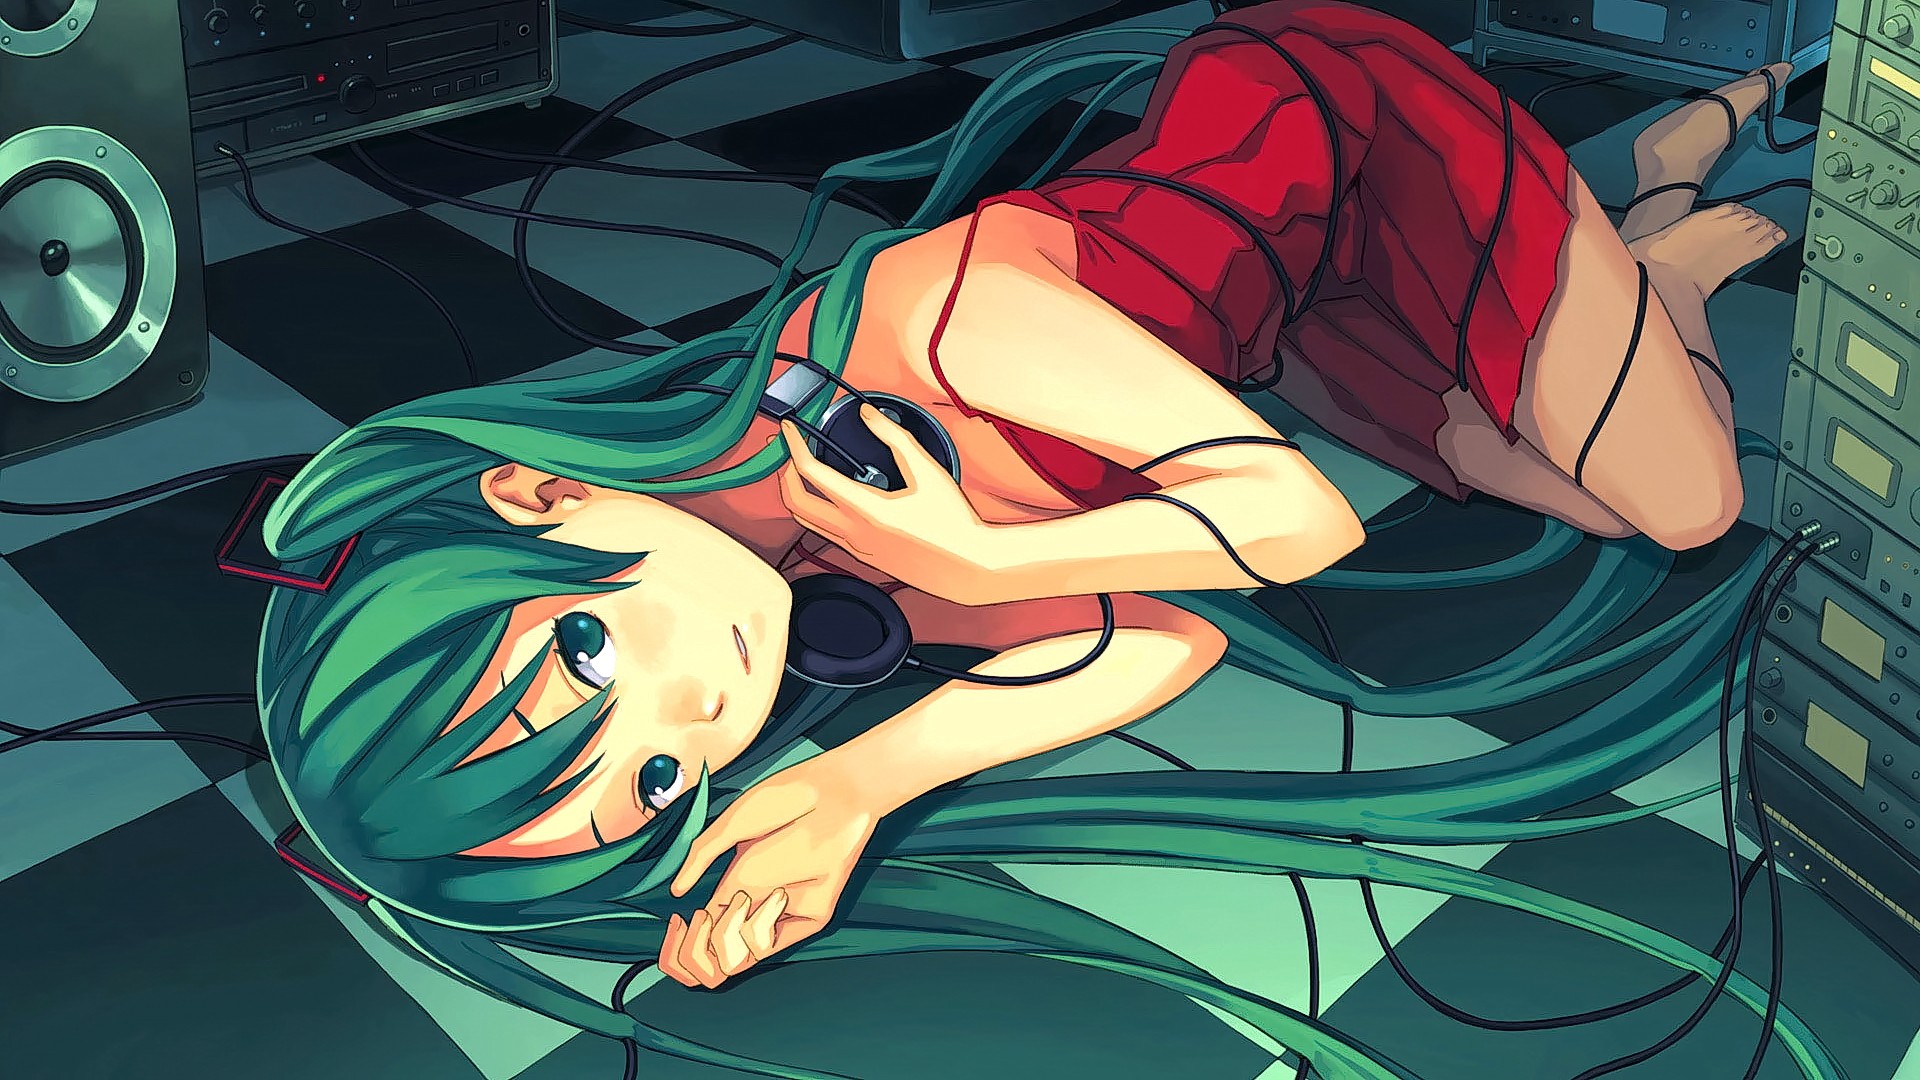 Anime 1920x1080 anime anime girls green hair long hair smiling dress looking at viewer Vocaloid Hatsune Miku headsets cyan hair on the floor audio-technica legs together red dress headphones